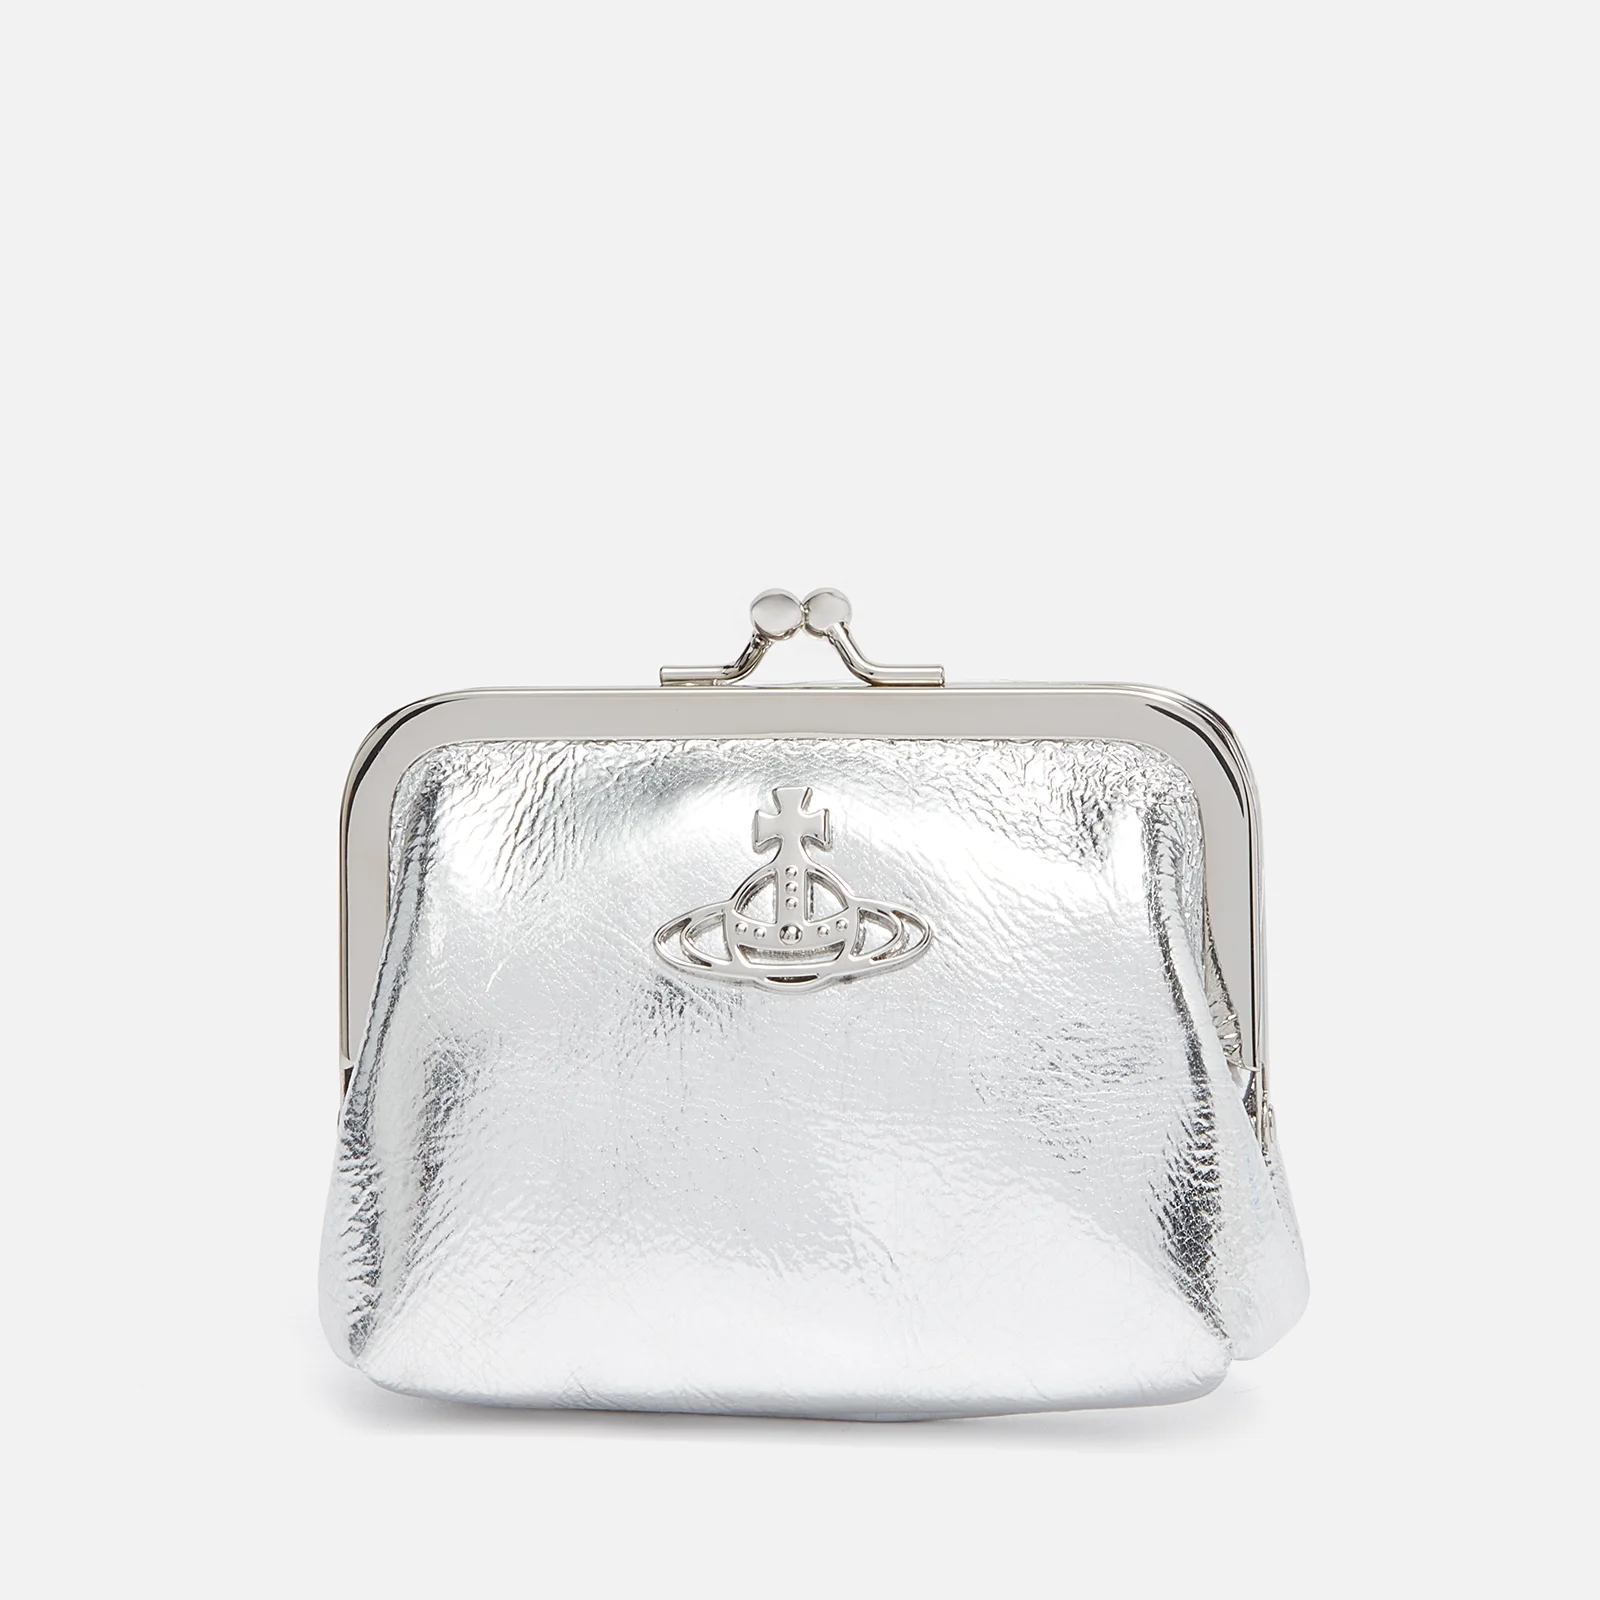 Vivienne Westwood Frame Metallic Faux Leather Coin Purse Image 1